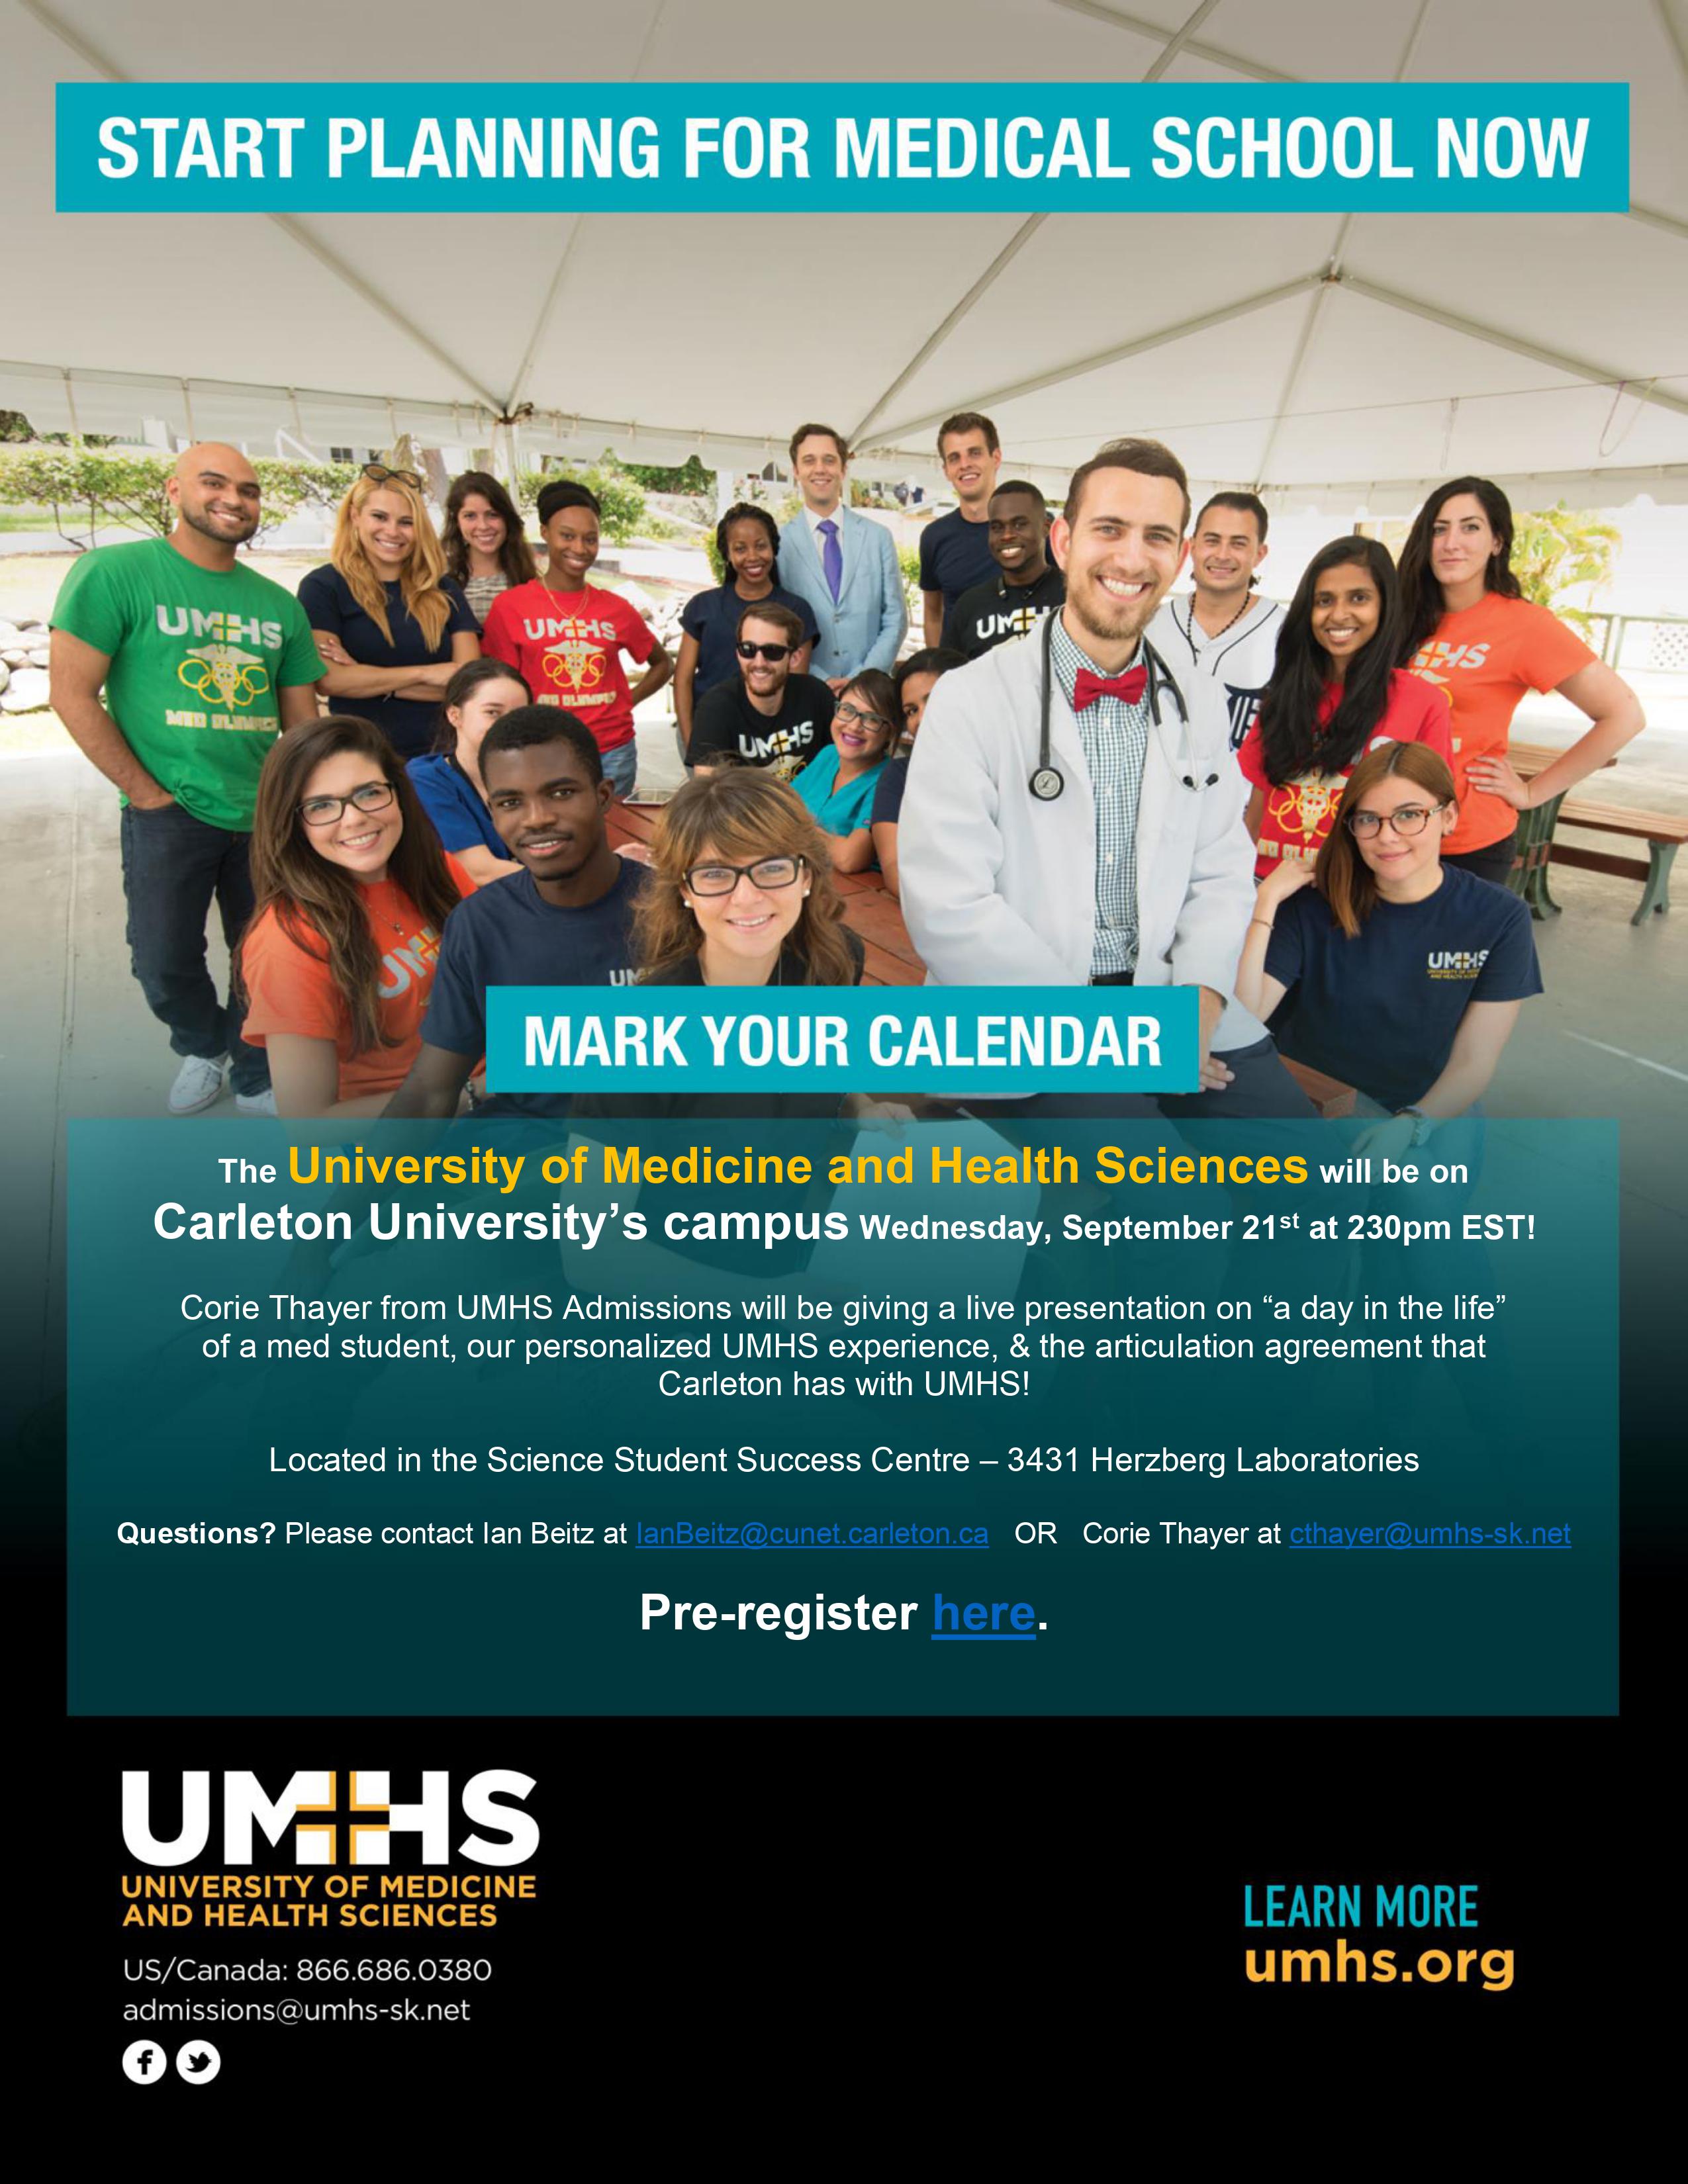 Start Planning For Medical School Now  Mark your calendar The University of Medicine and Health Sciences will be on  Carleton University’s campus Wednesday, September 21st at 230pm EST!  Corie Thayer from UMHS Admissions will be giving a live presentation on “a day in the life”  of a med student, our personalized UMHS experience, & the articulation agreement that  Carleton has with UMHS!  Located in the Science Student Success Centre – 3431 Herzberg Laboratories  Questions? Please contact the sssc via email  Pre-register here. UMHS University of Medicine and Health Sciences  US/Canada: 866.686.0380 Learn more umhs.org